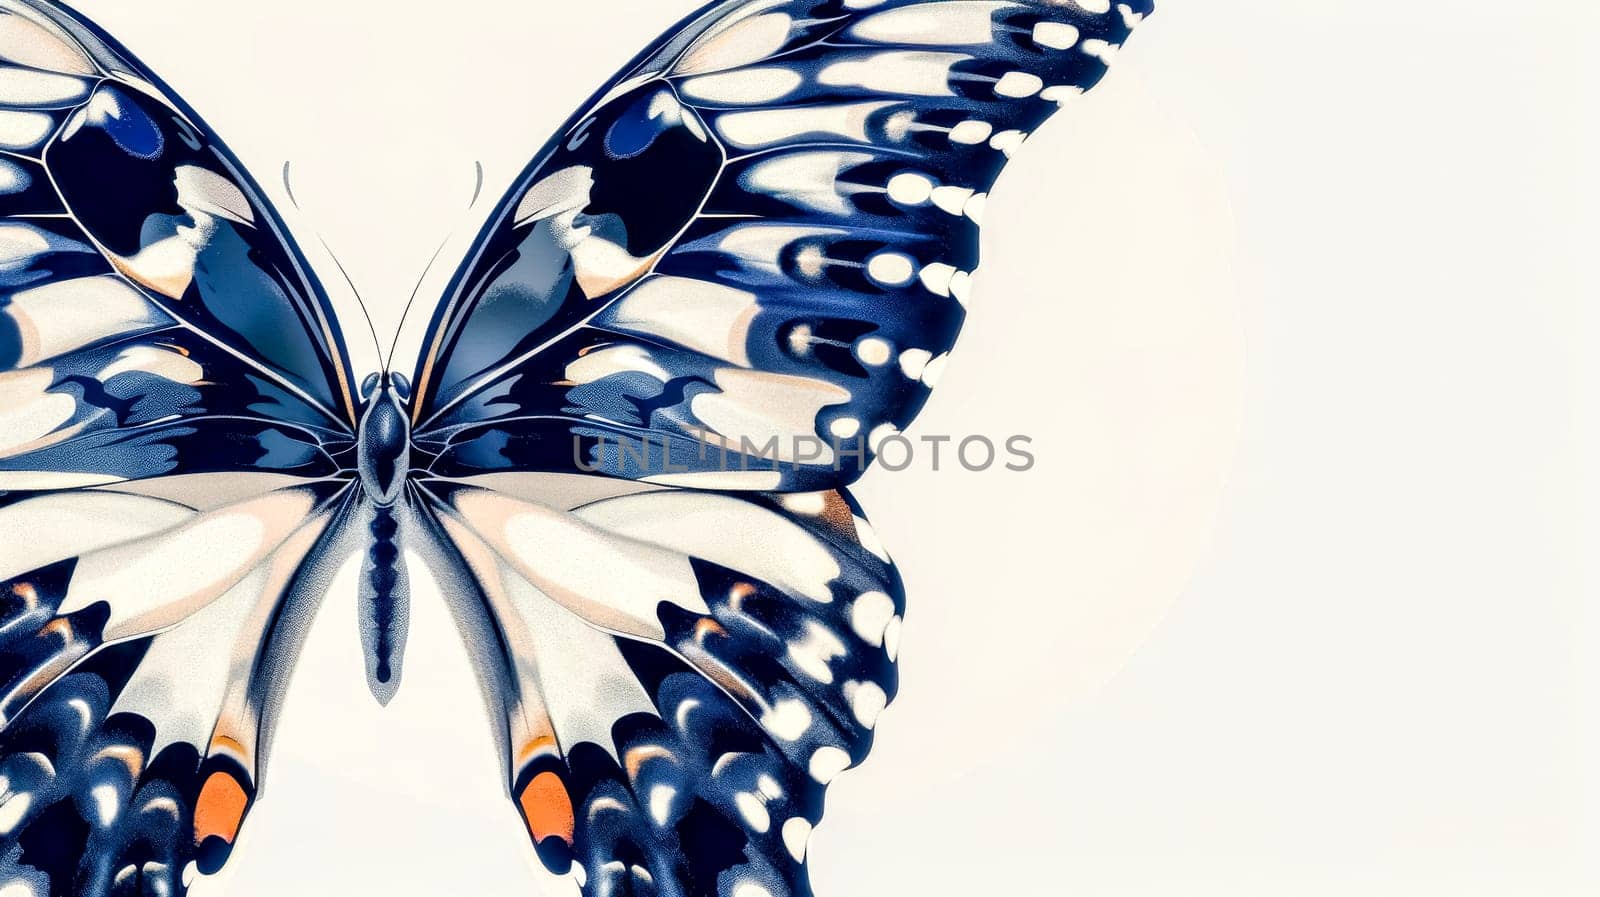 Blue and orange butterfly on white background by Edophoto